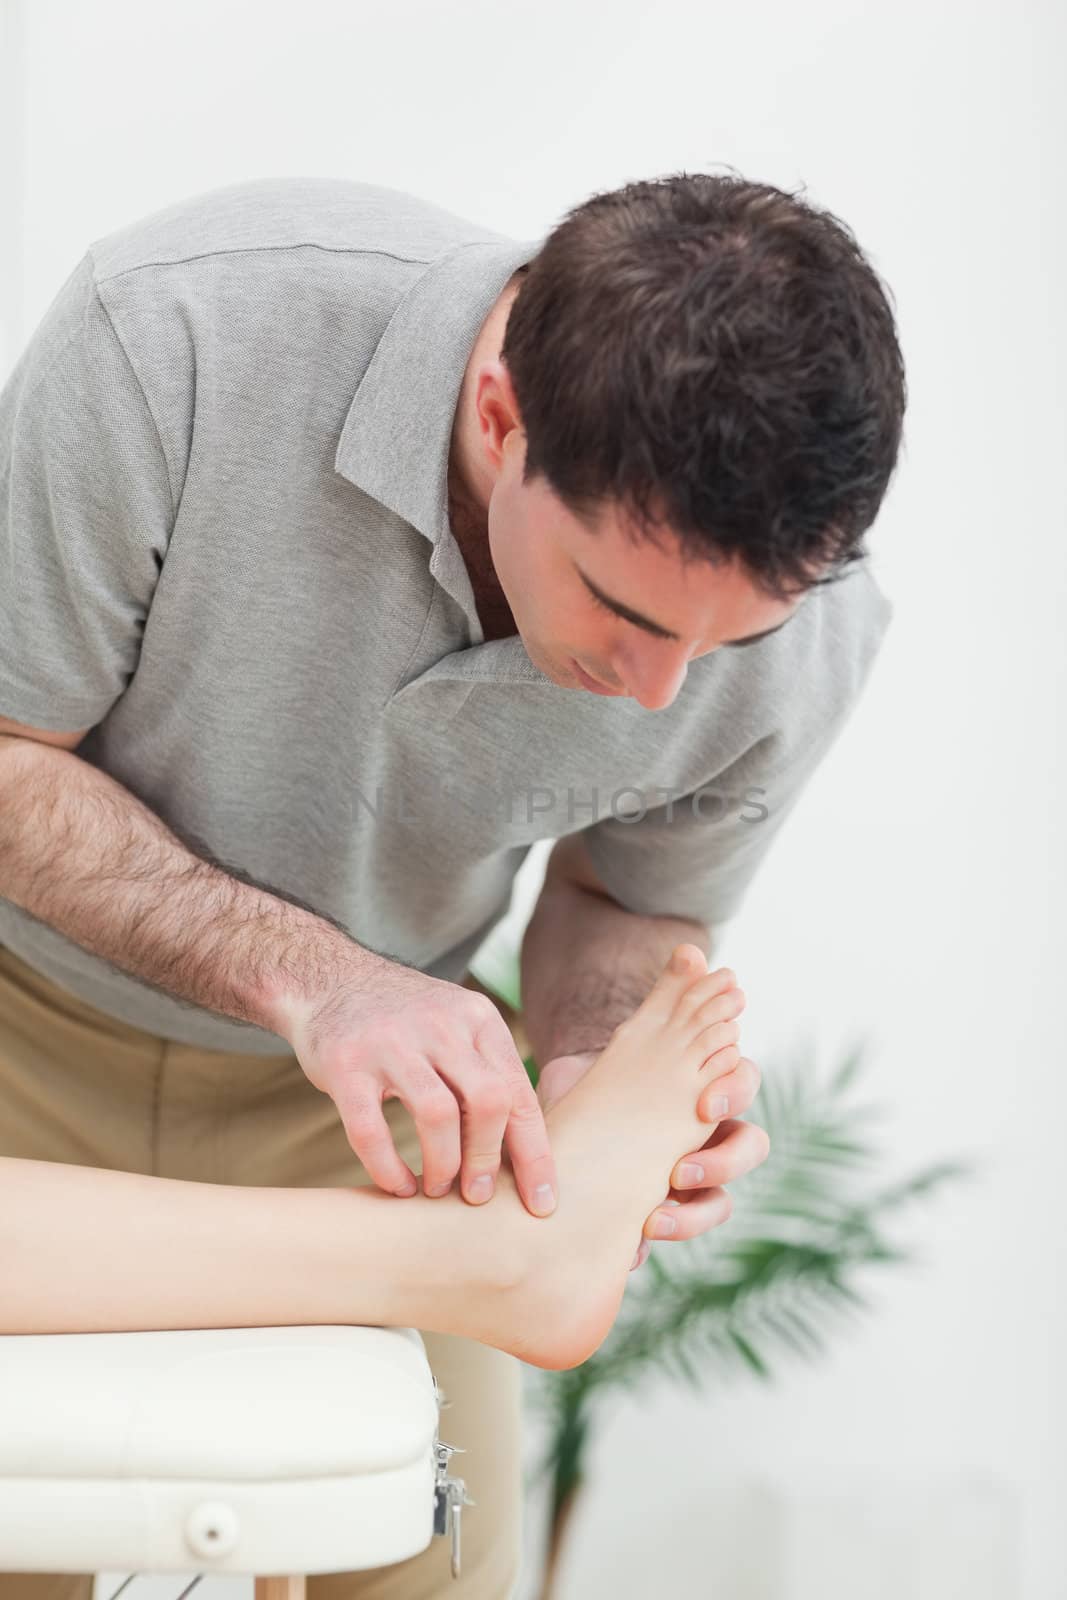 Podiatrist examining the foot of a patient in a room